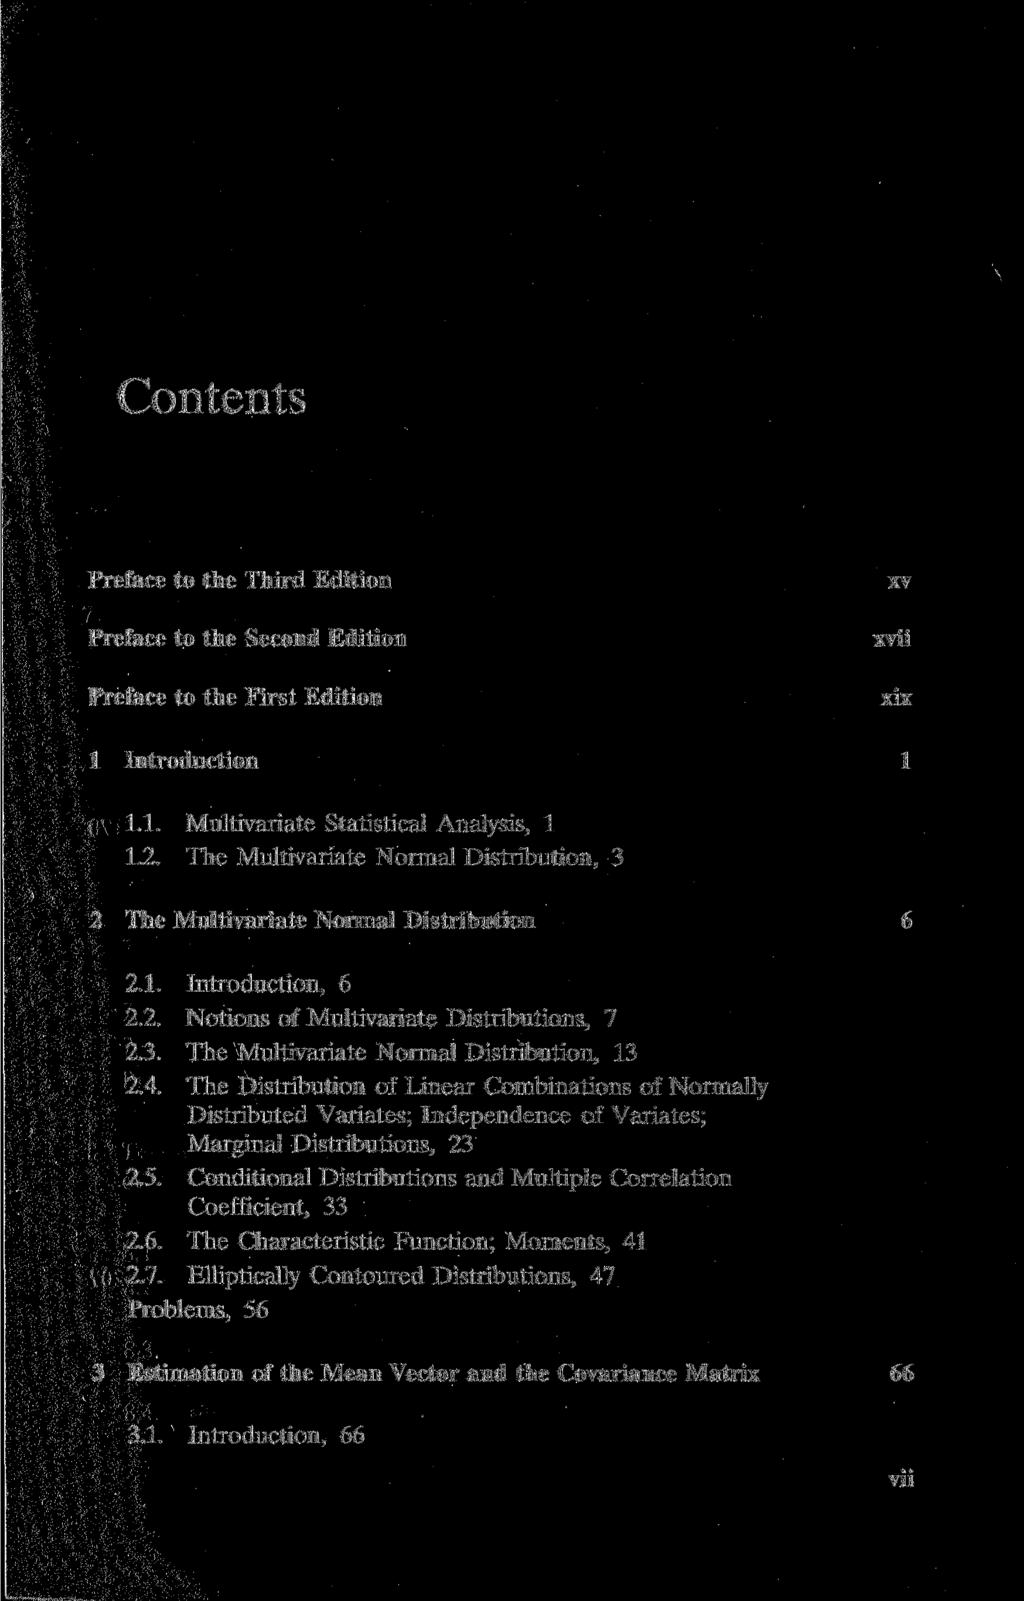 Contents Preface to the Third Edition Preface to the Second Edition Preface to the First Edition 1 Introduction 1.1. Multivariate Statistical Analysis, 1 1.2.